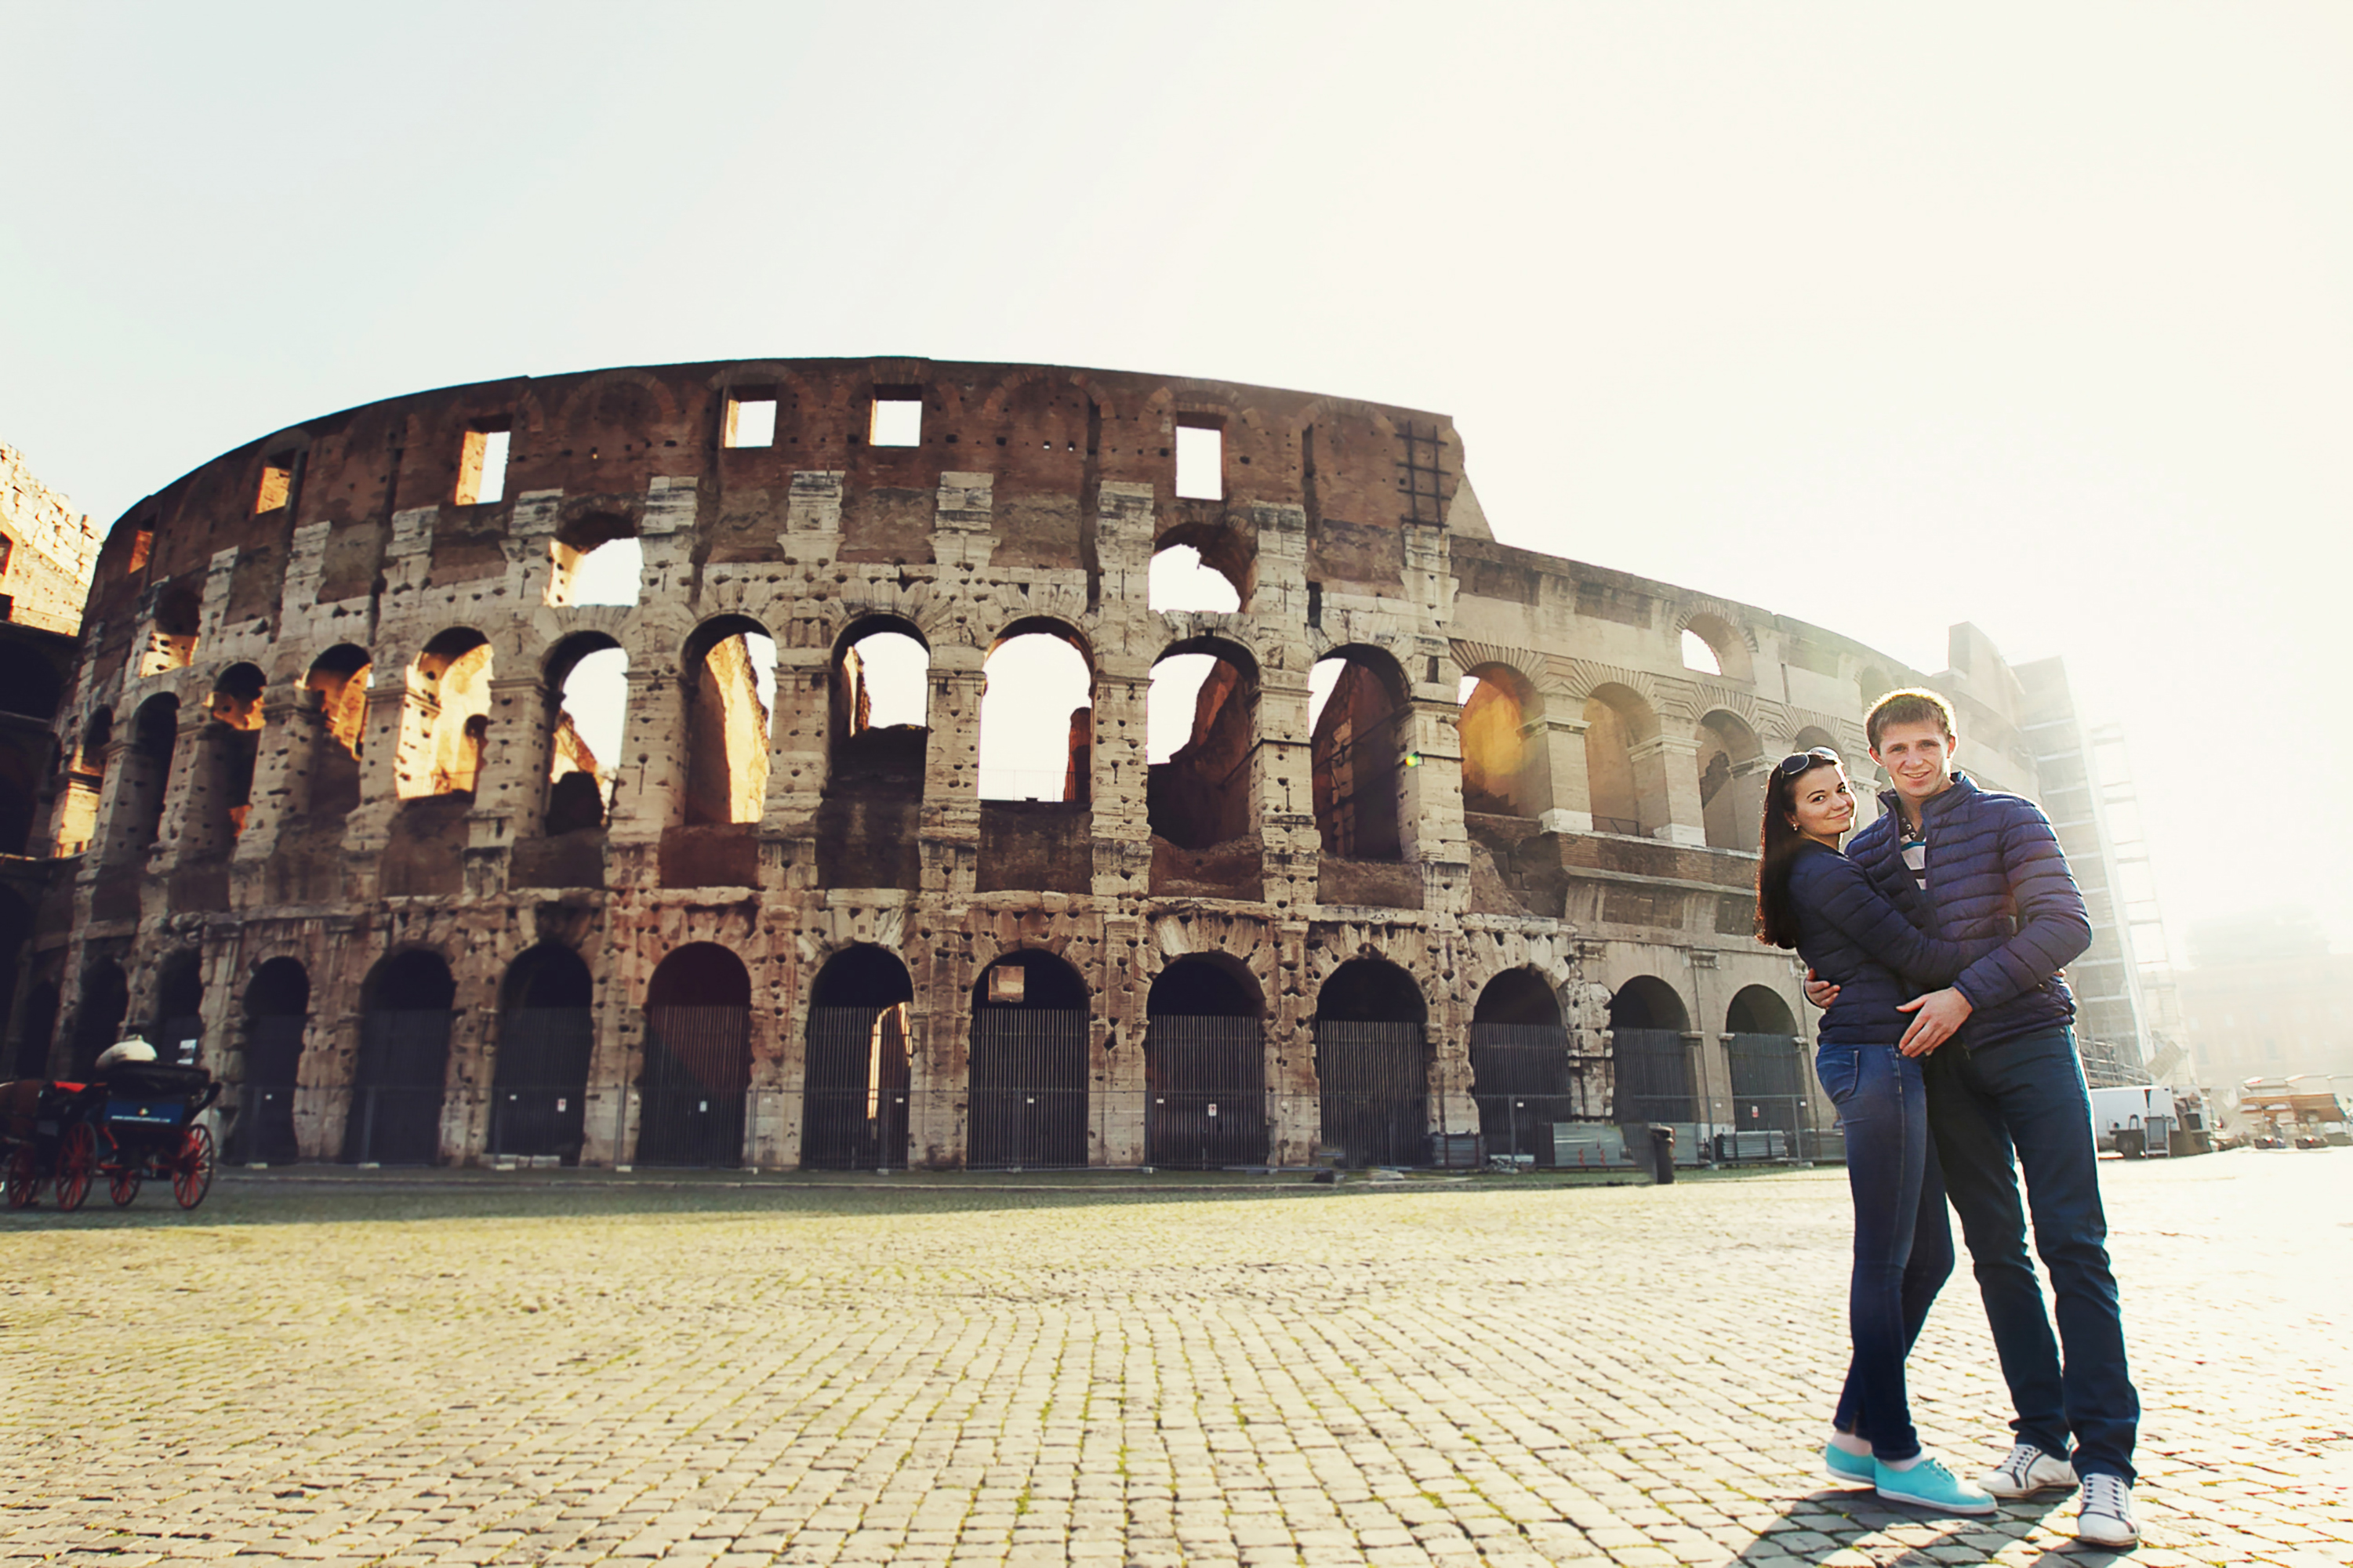 Two people standing near Coliseum in Rome